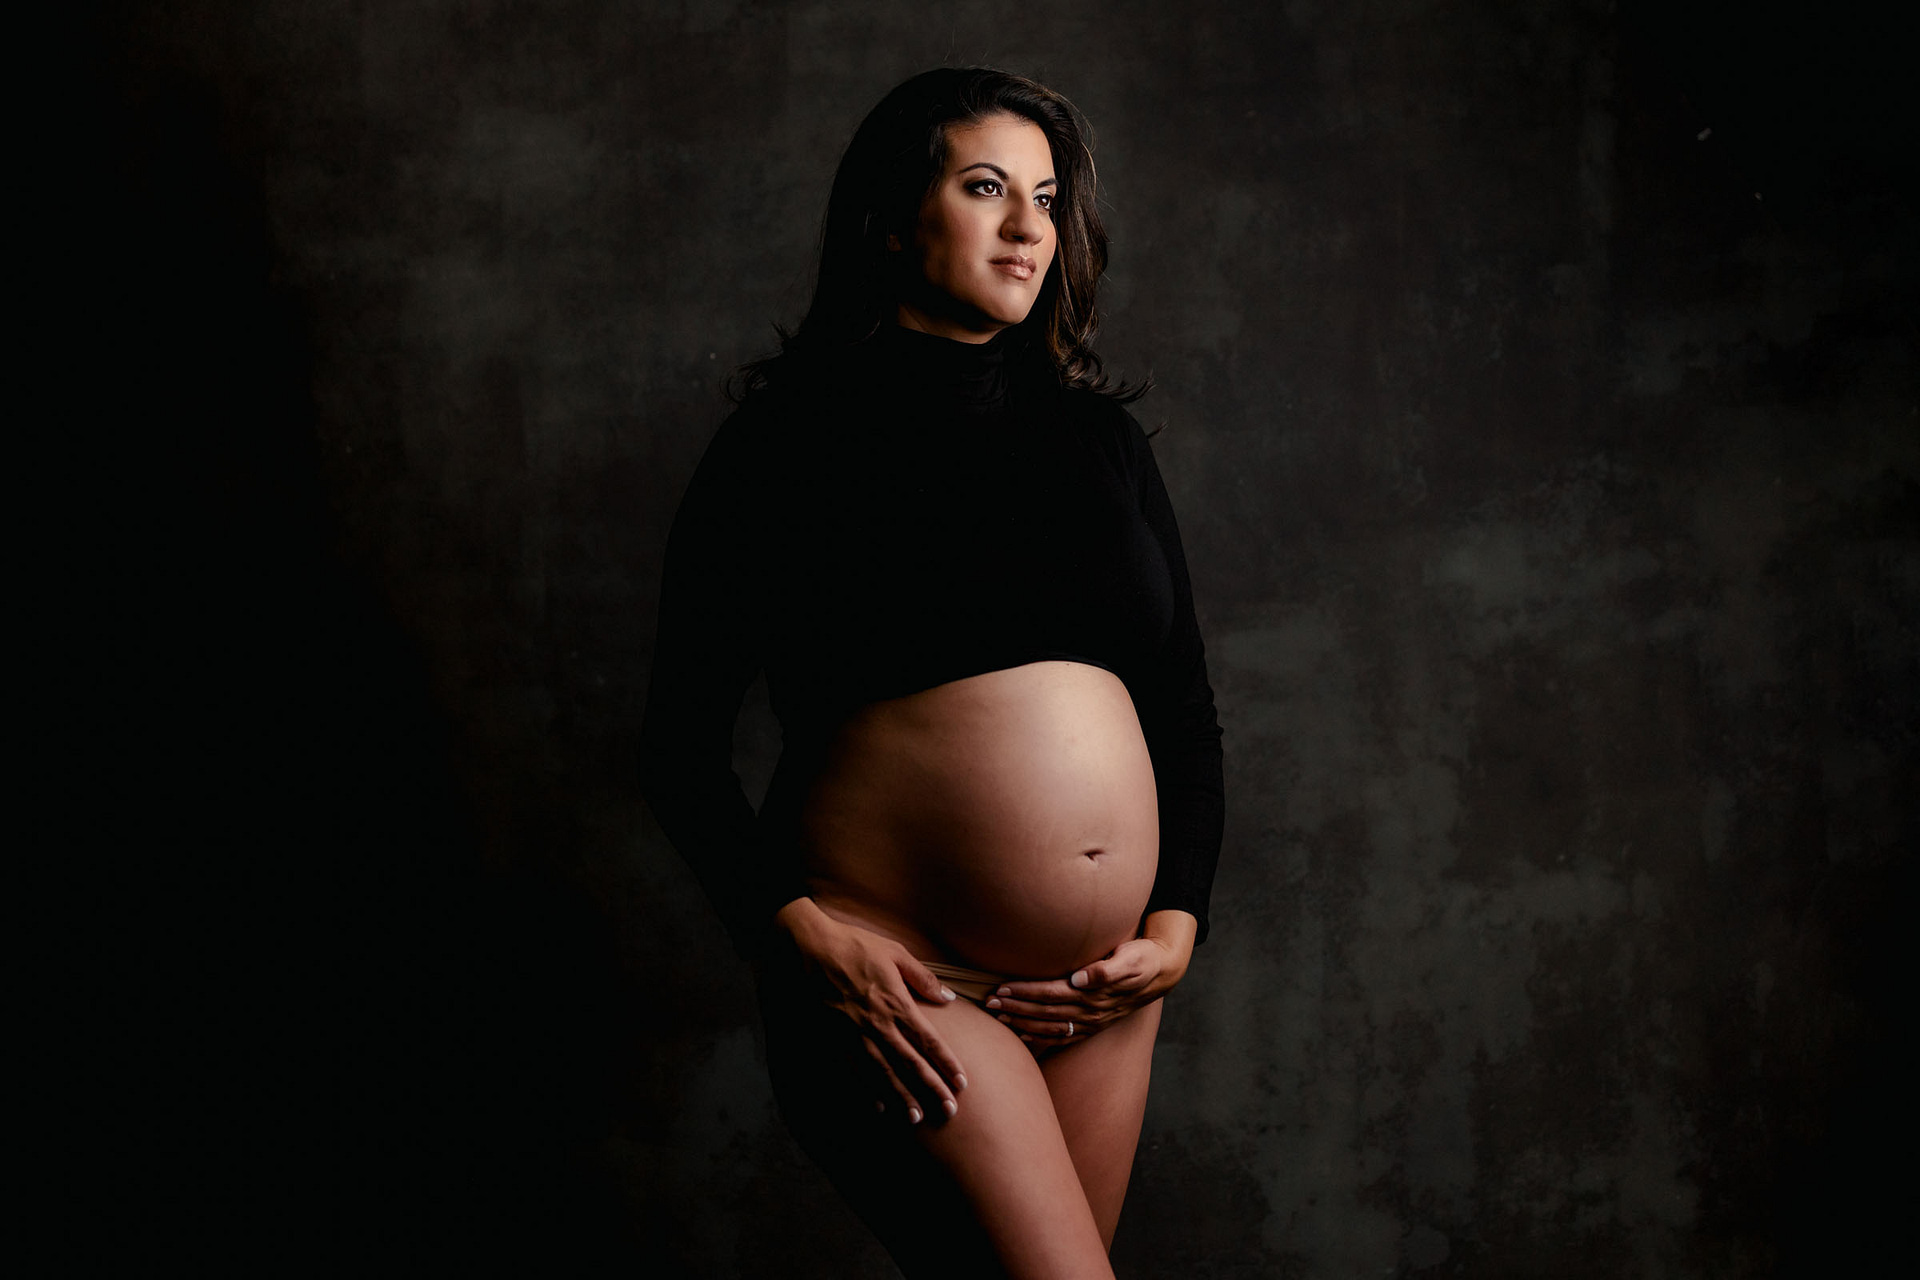 Bare Belly Pregnancy Photo with Black Croptop in San Diego Photo Studio